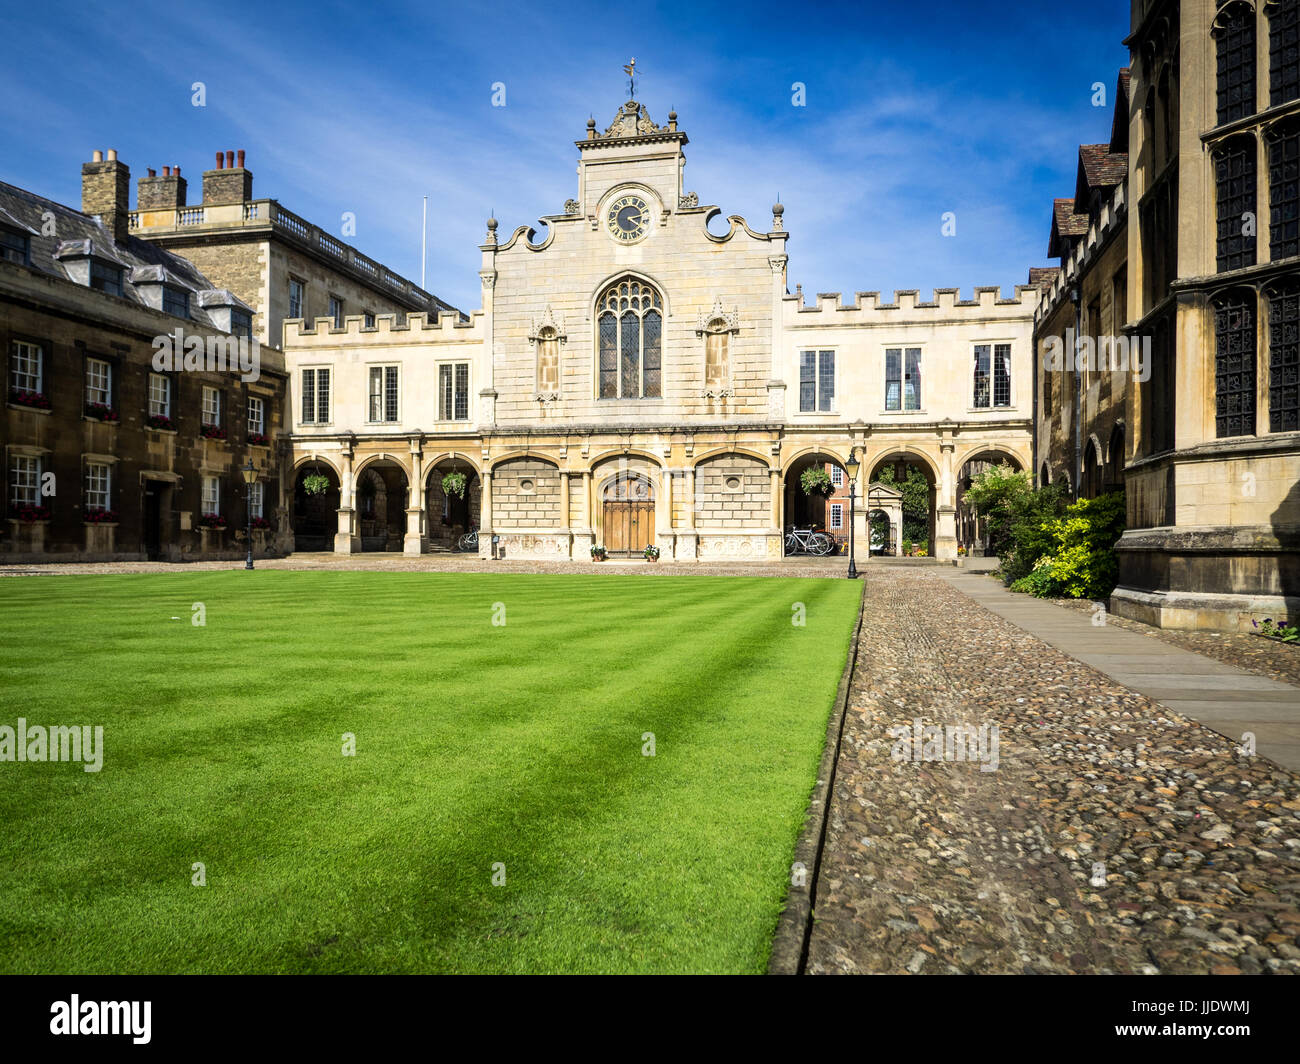 Cambridge - The Clock Tower and Lawns of Peterhouse College, part of the University of Cambridge. The college was founded in 1284. Stock Photo